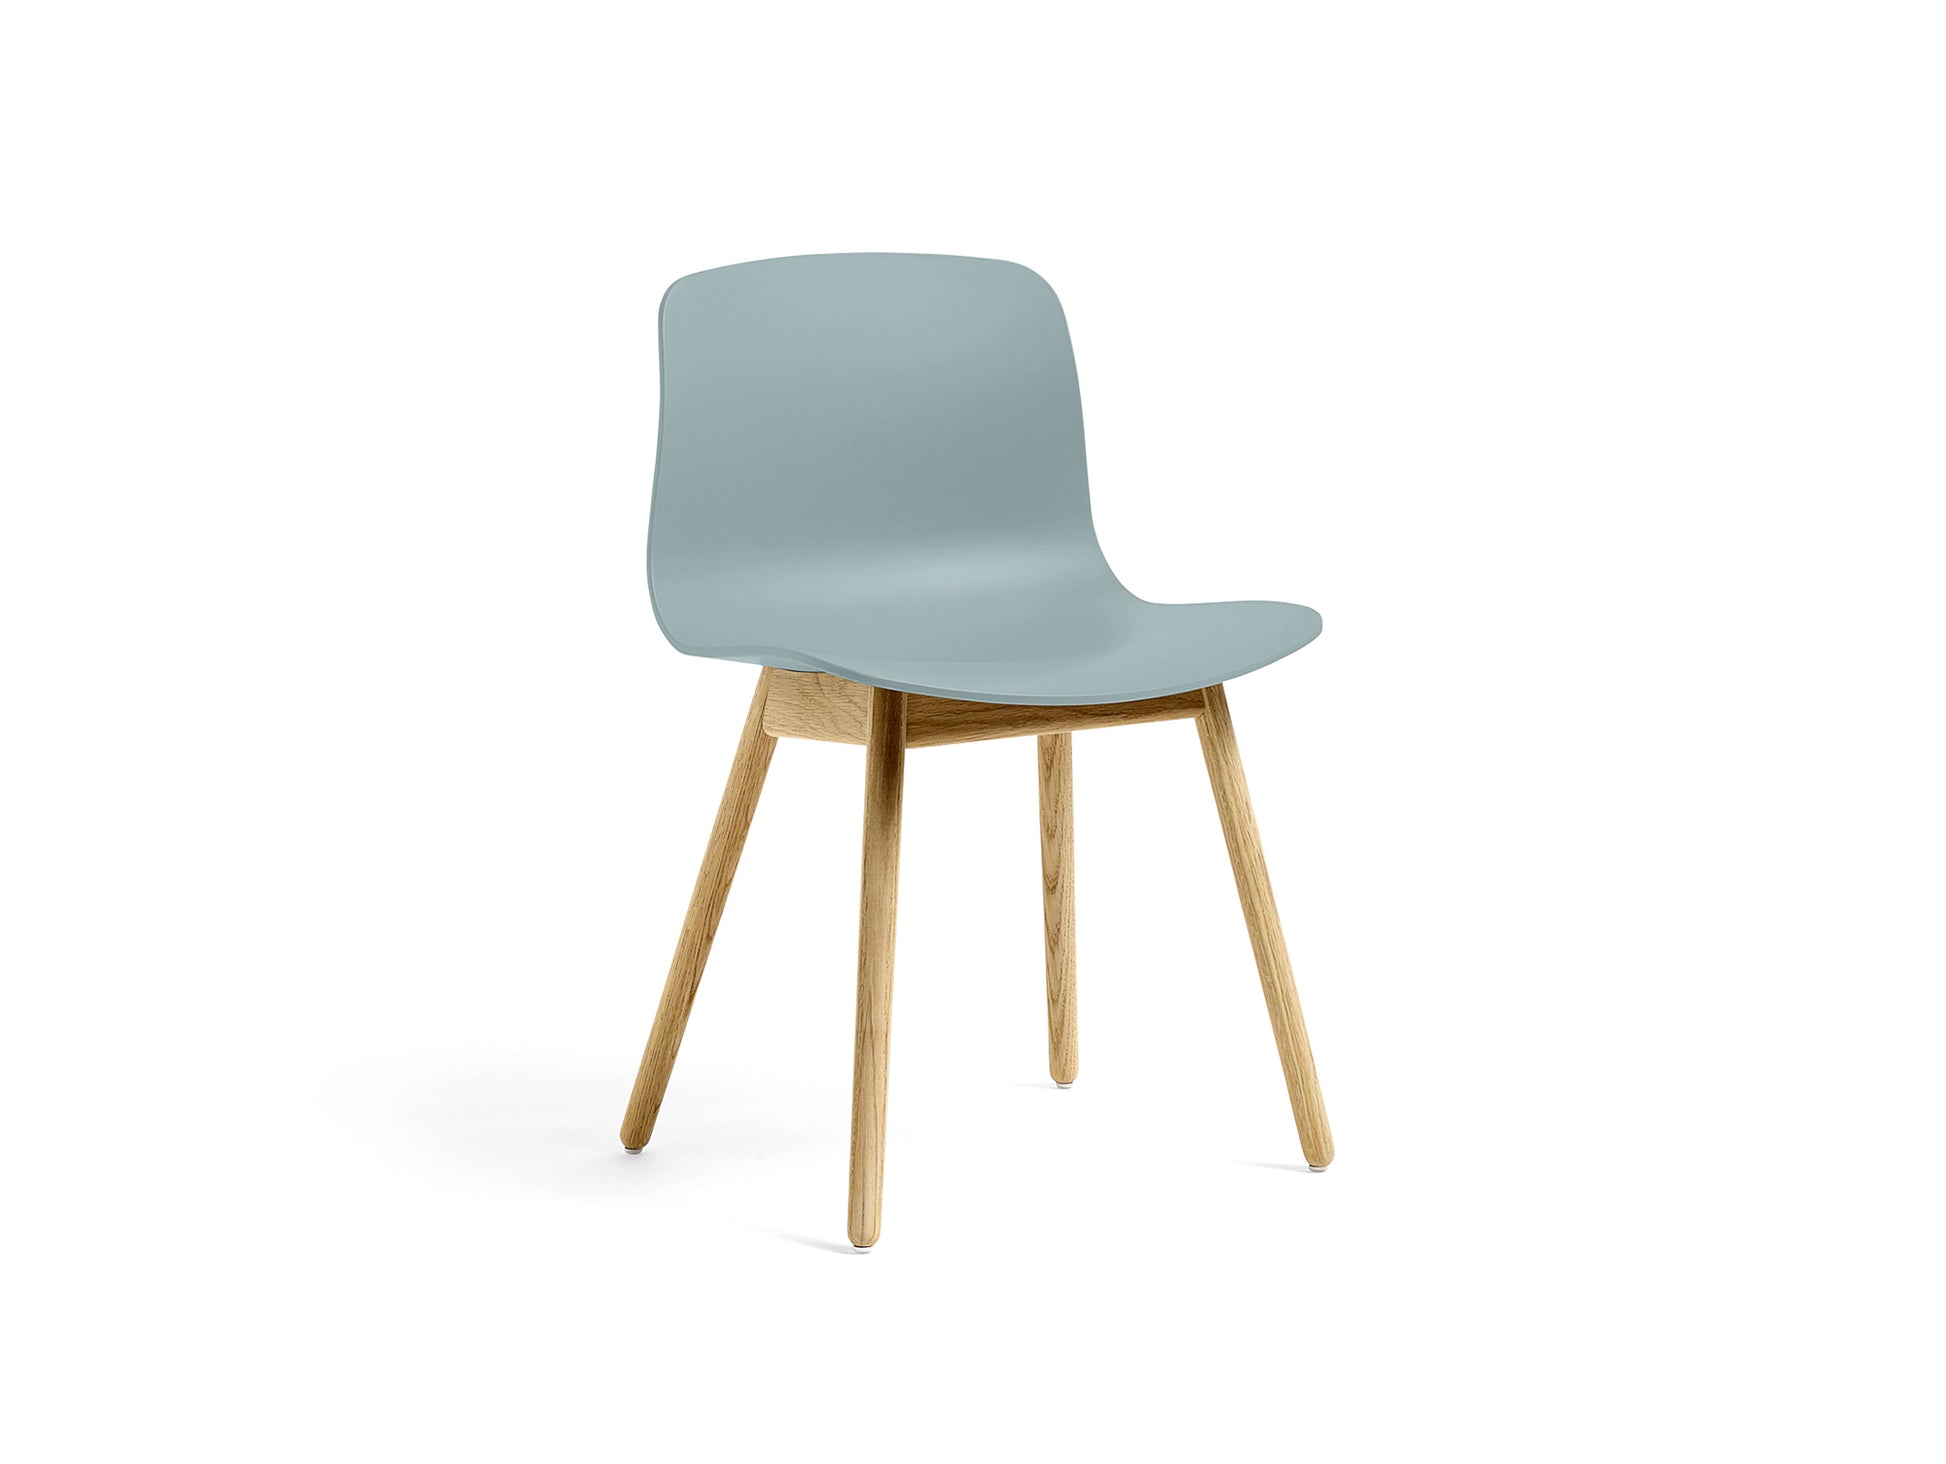 About A Chair AAC 12 by HAY - Dusty Blue 2.0 Shell / Lacquered Oak Base